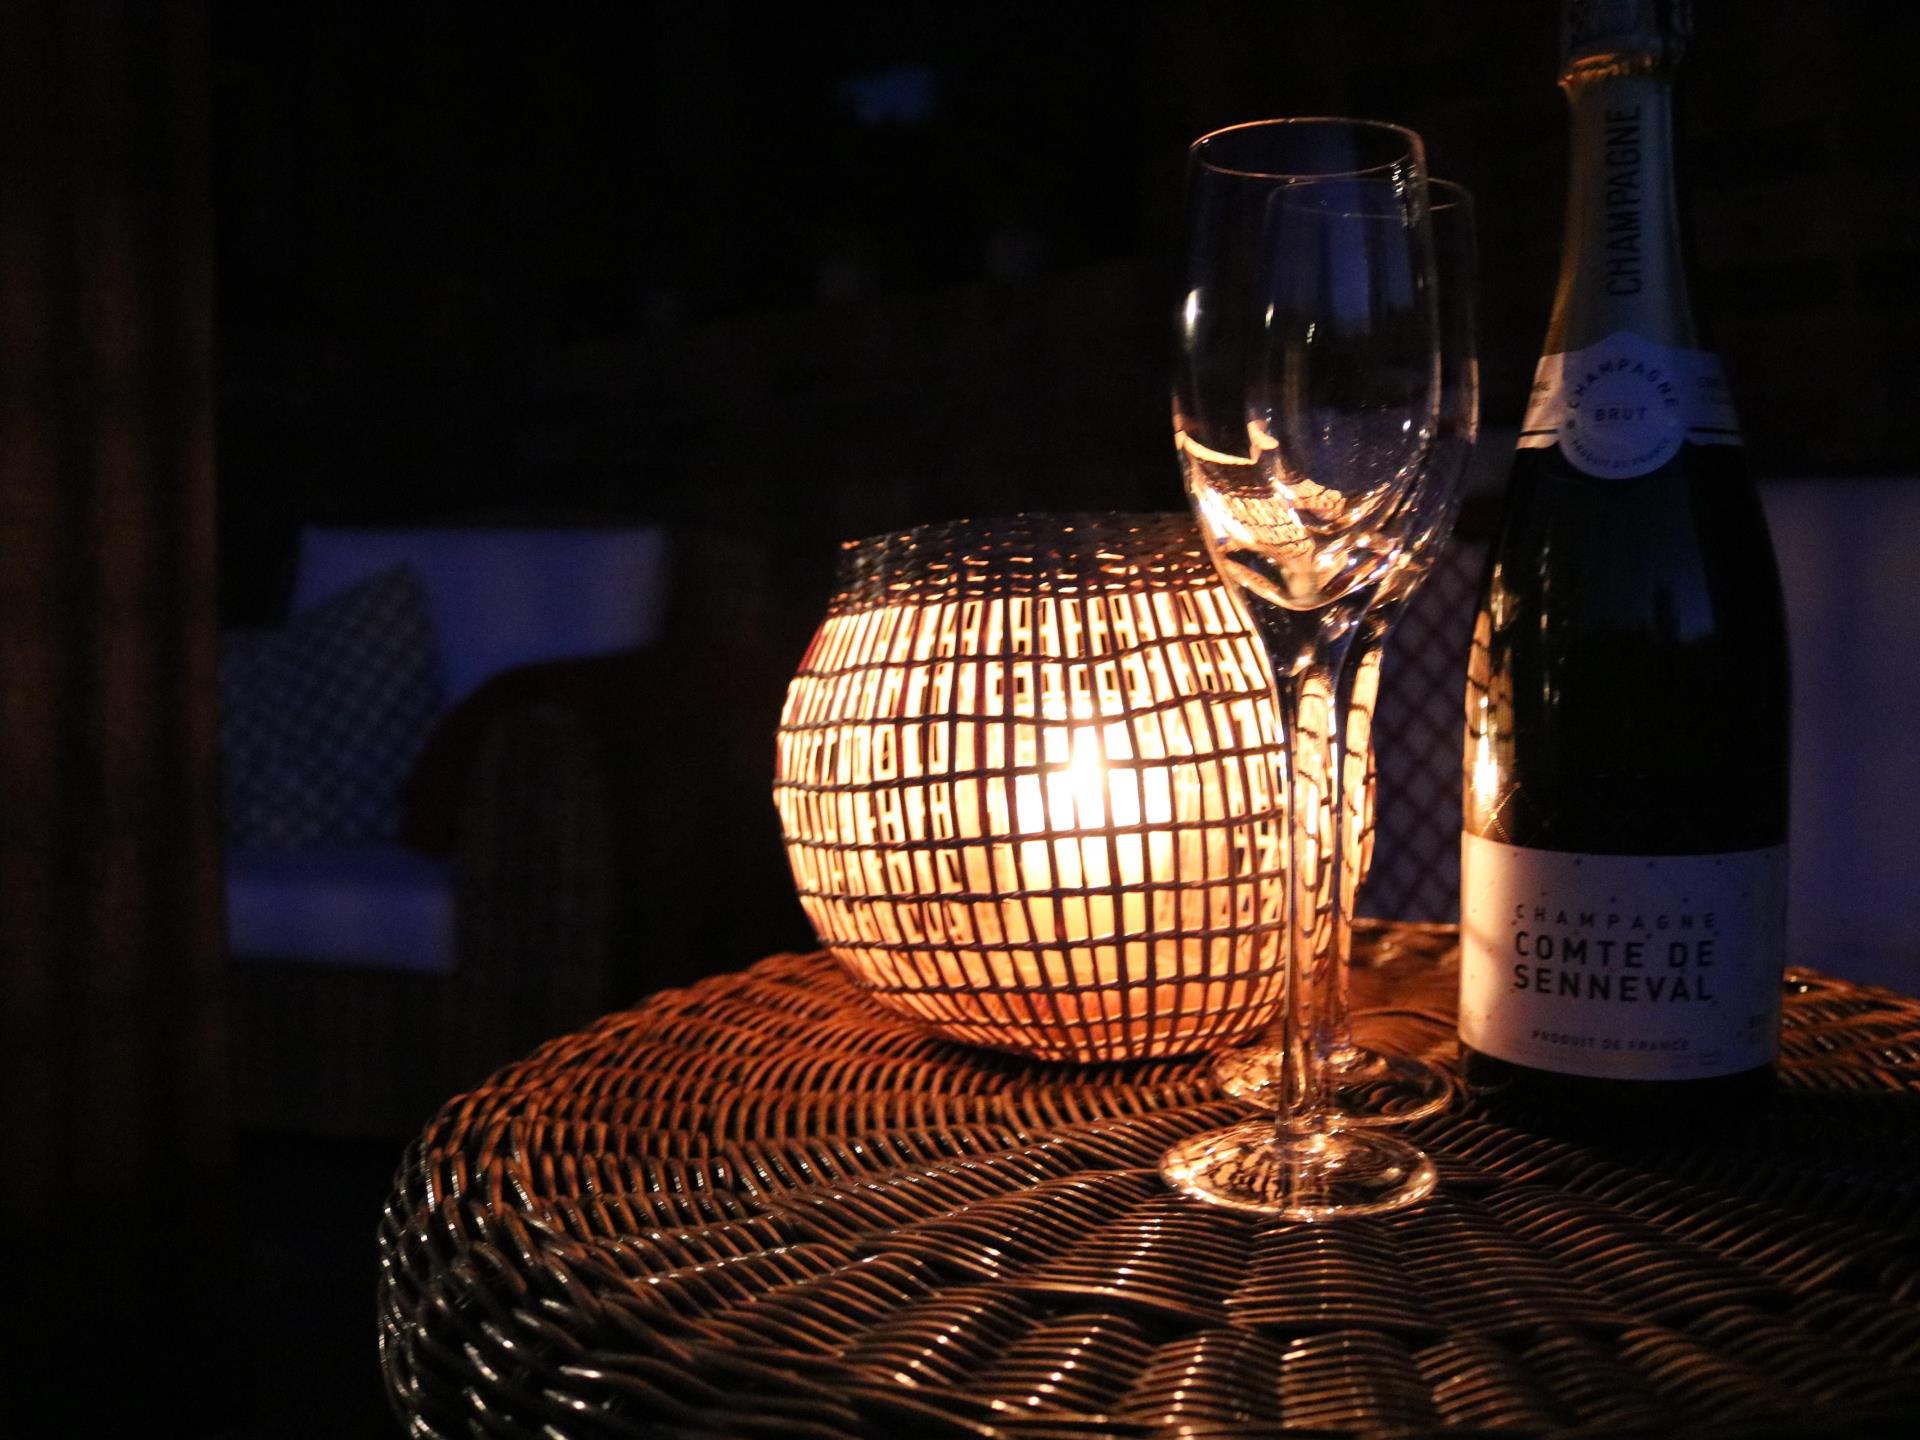 Enjoy the summer evenings on the patio